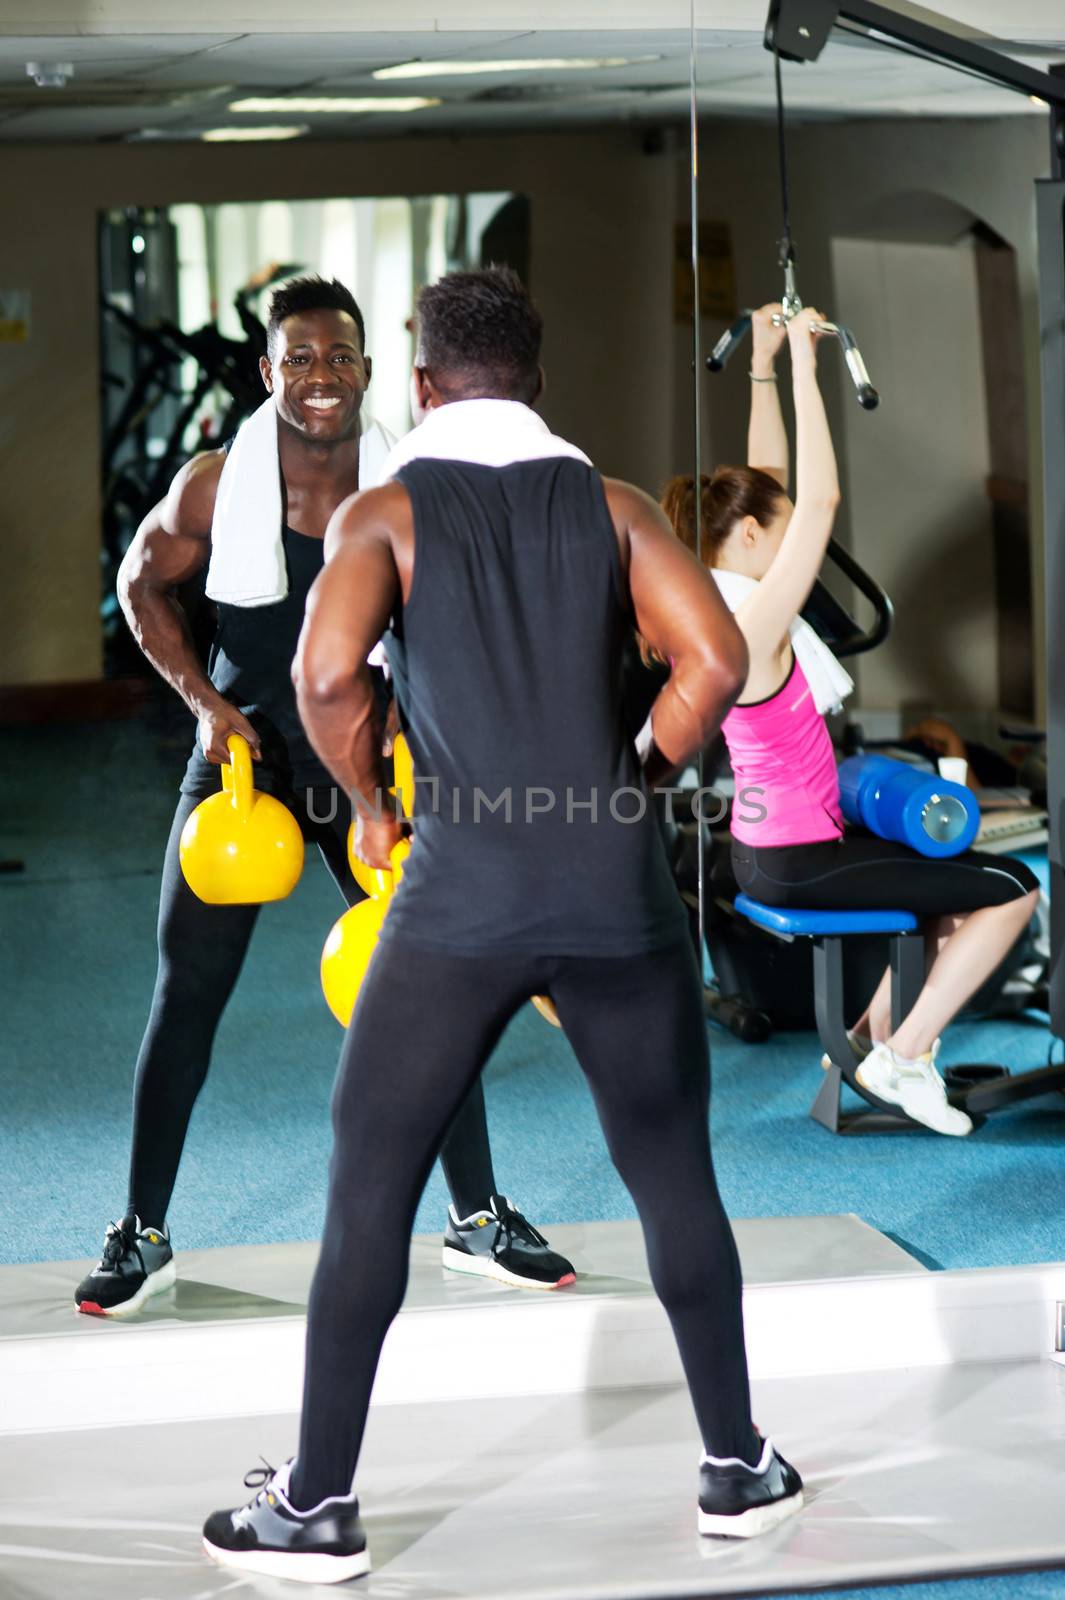 Fitness people working out with equipments by stockyimages